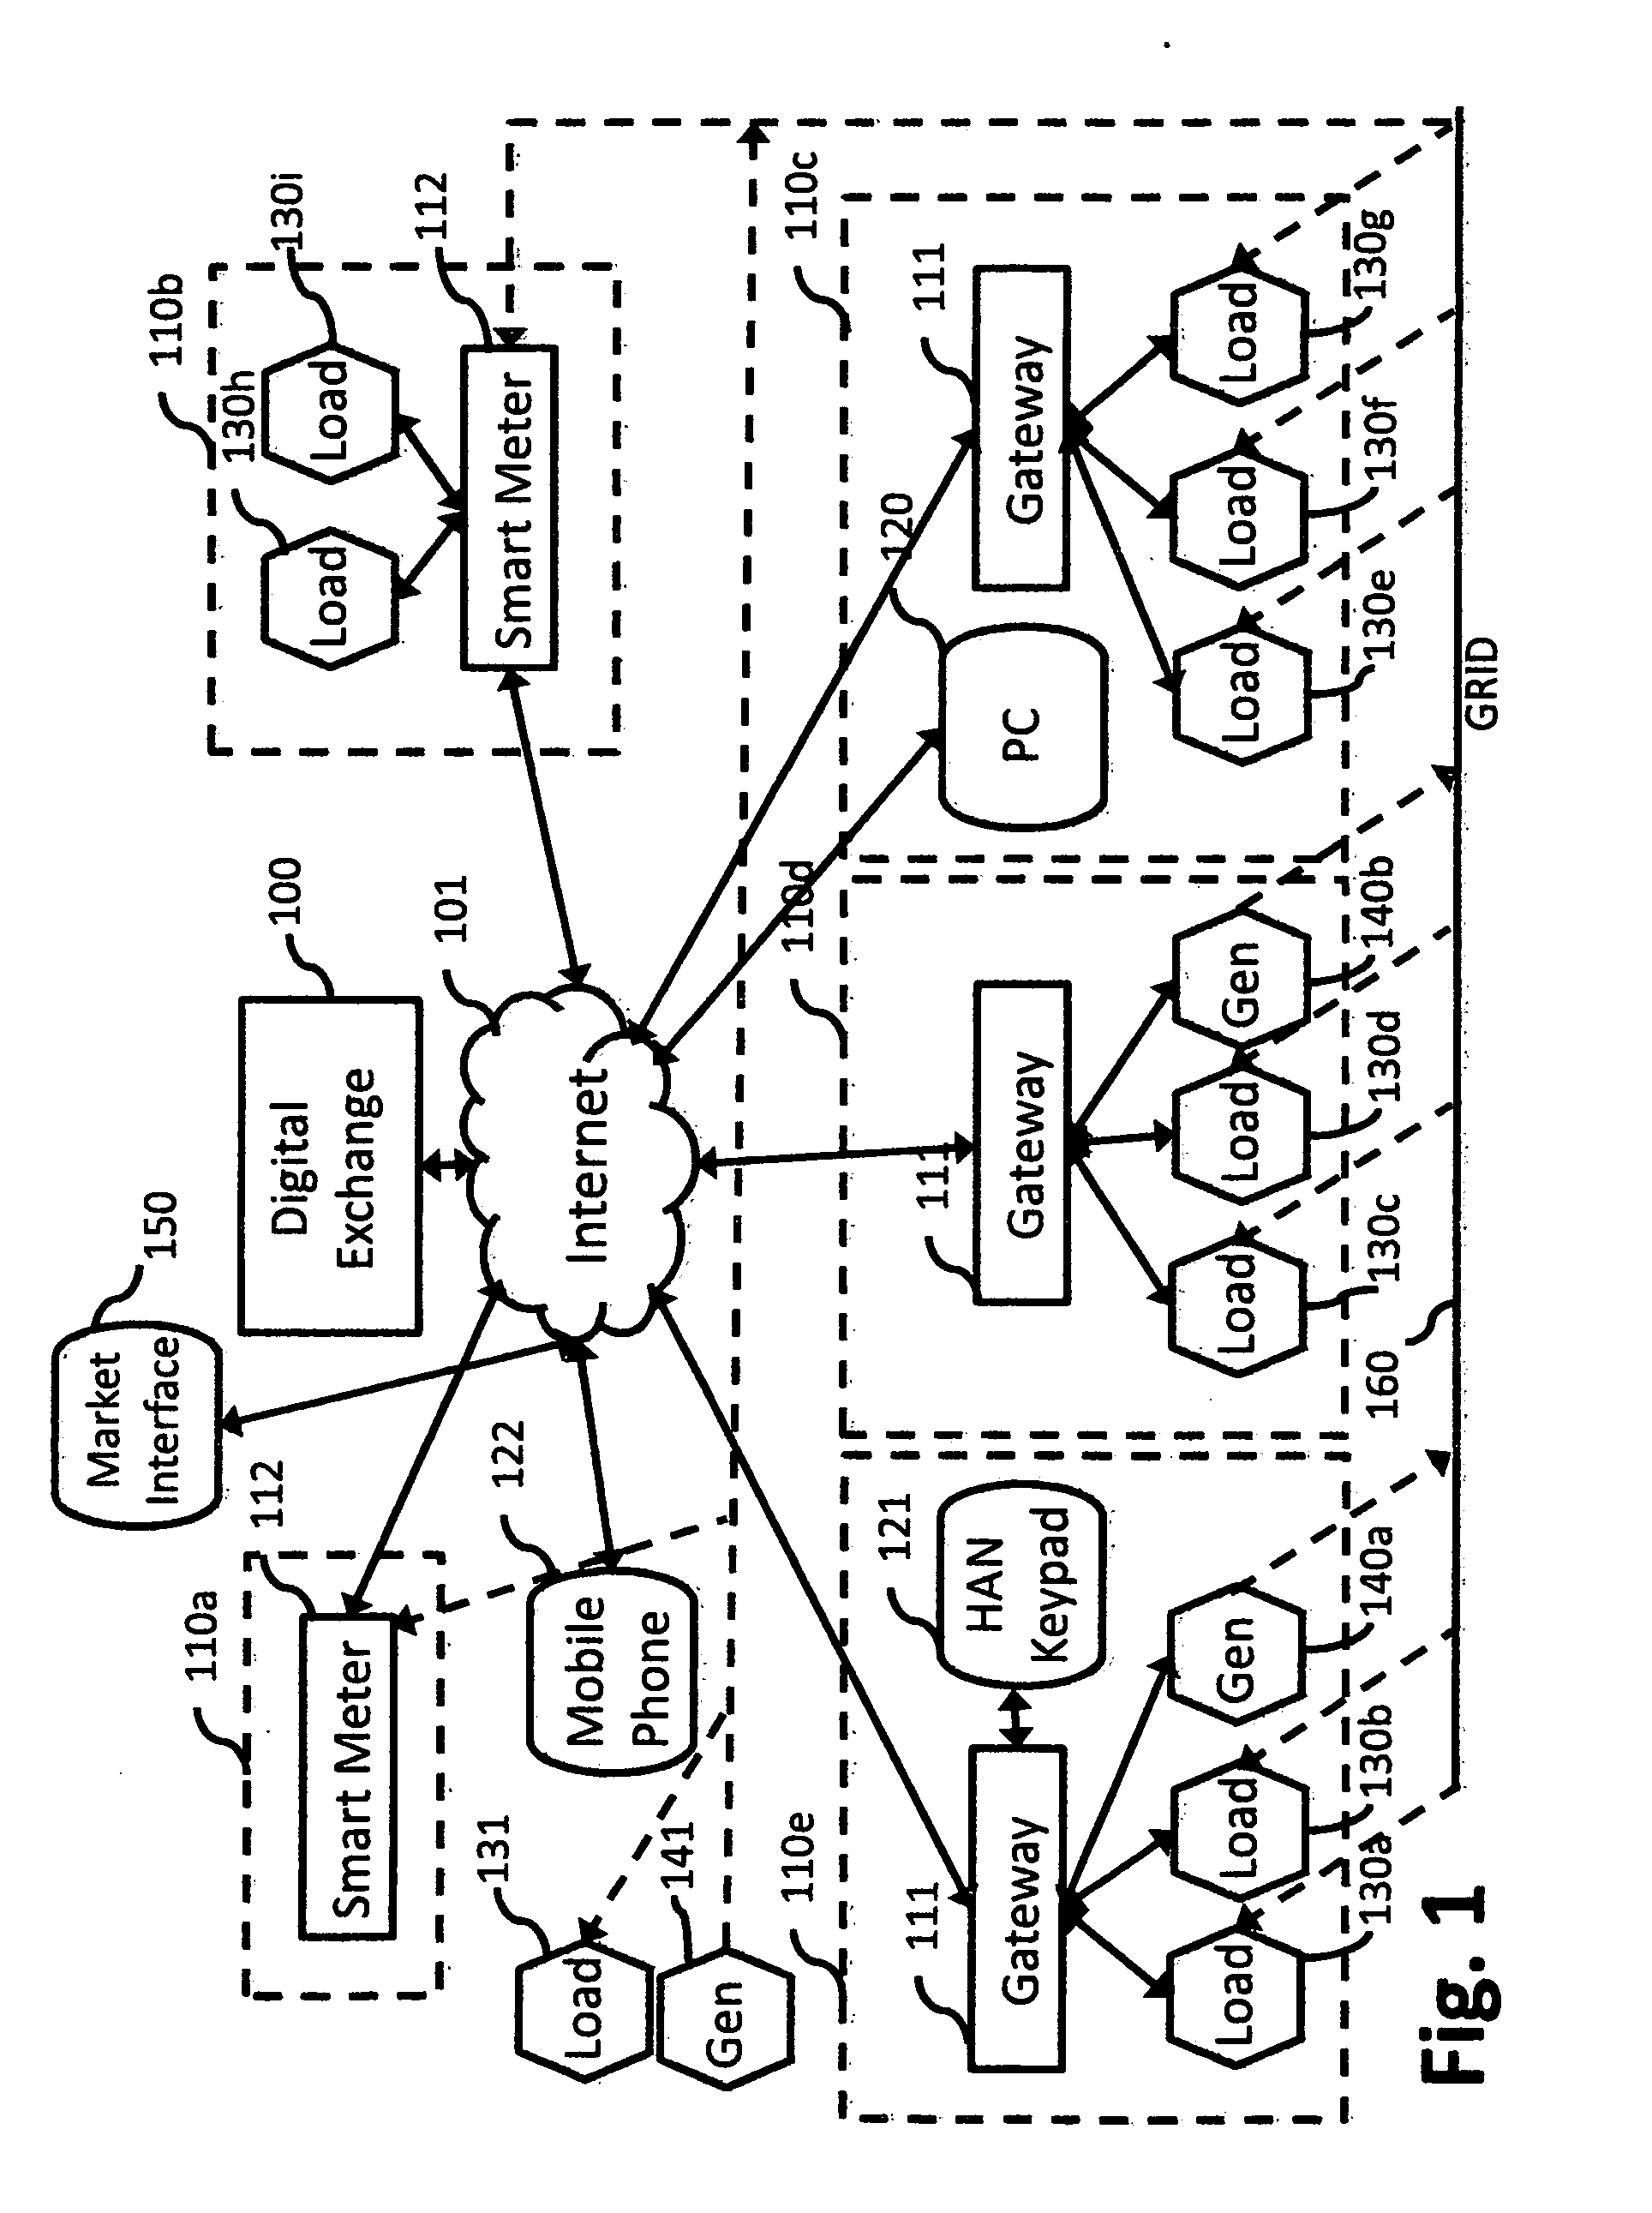 System and method for managing energy